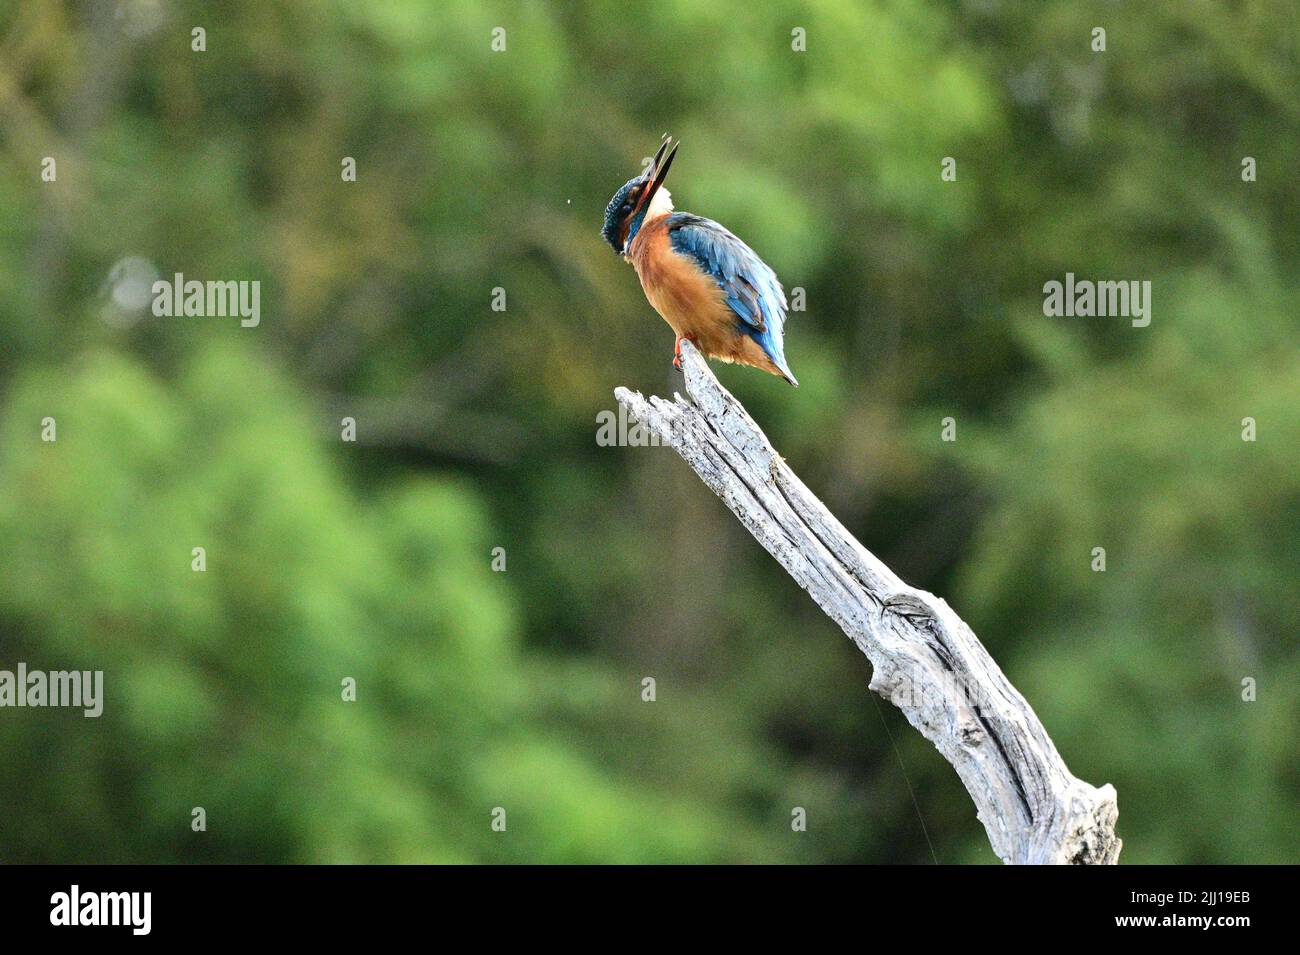 The kingfisher perches on a branch. UK: THESE BEAUTIFUL images mark a momentous occasion for this blind photographer as he finally achieves his dream Stock Photo